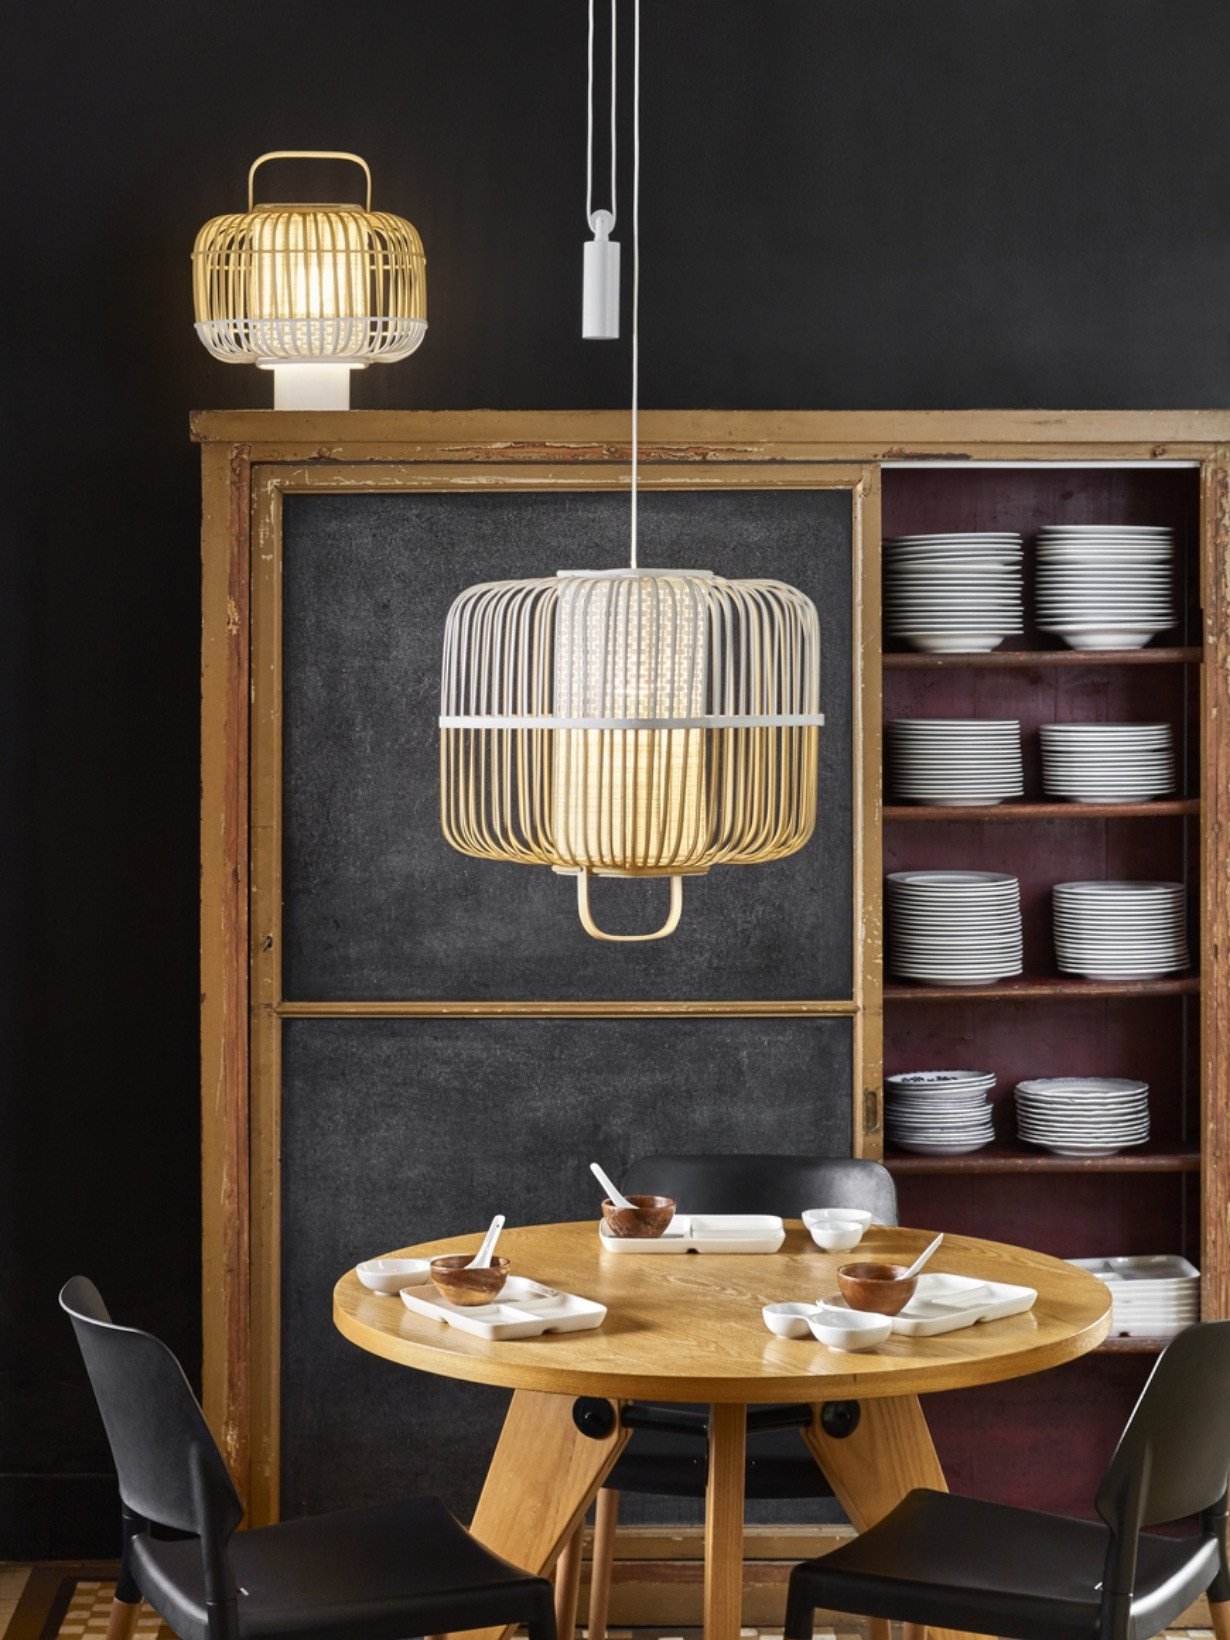 Natural bamboo hanging lamp, Bamboo Square M Forestier